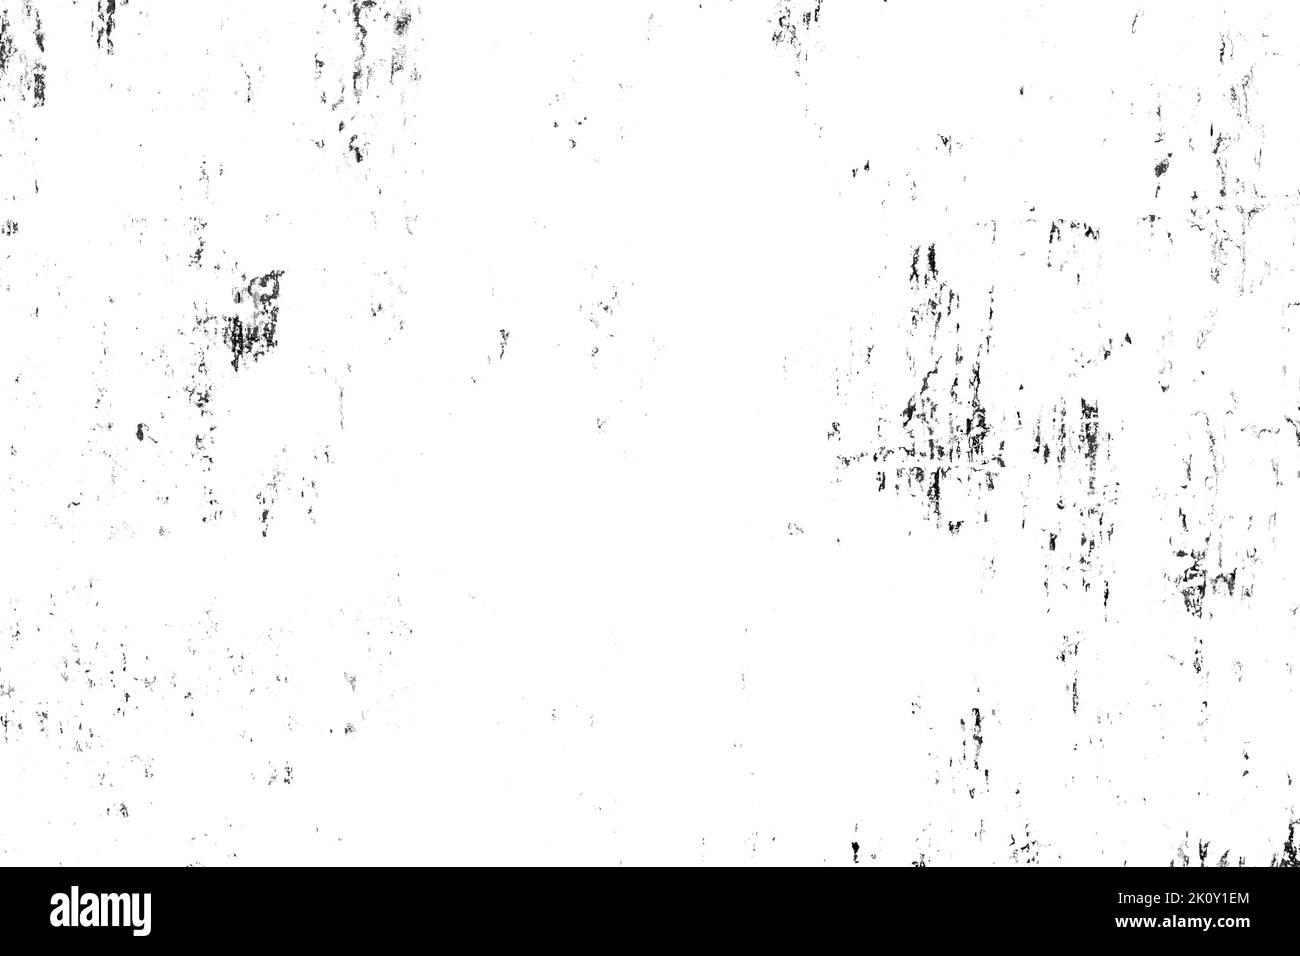 Grunge black and white texture. Distressed Effect. Dust overlay distress grain, simply place illustration Stock Photo